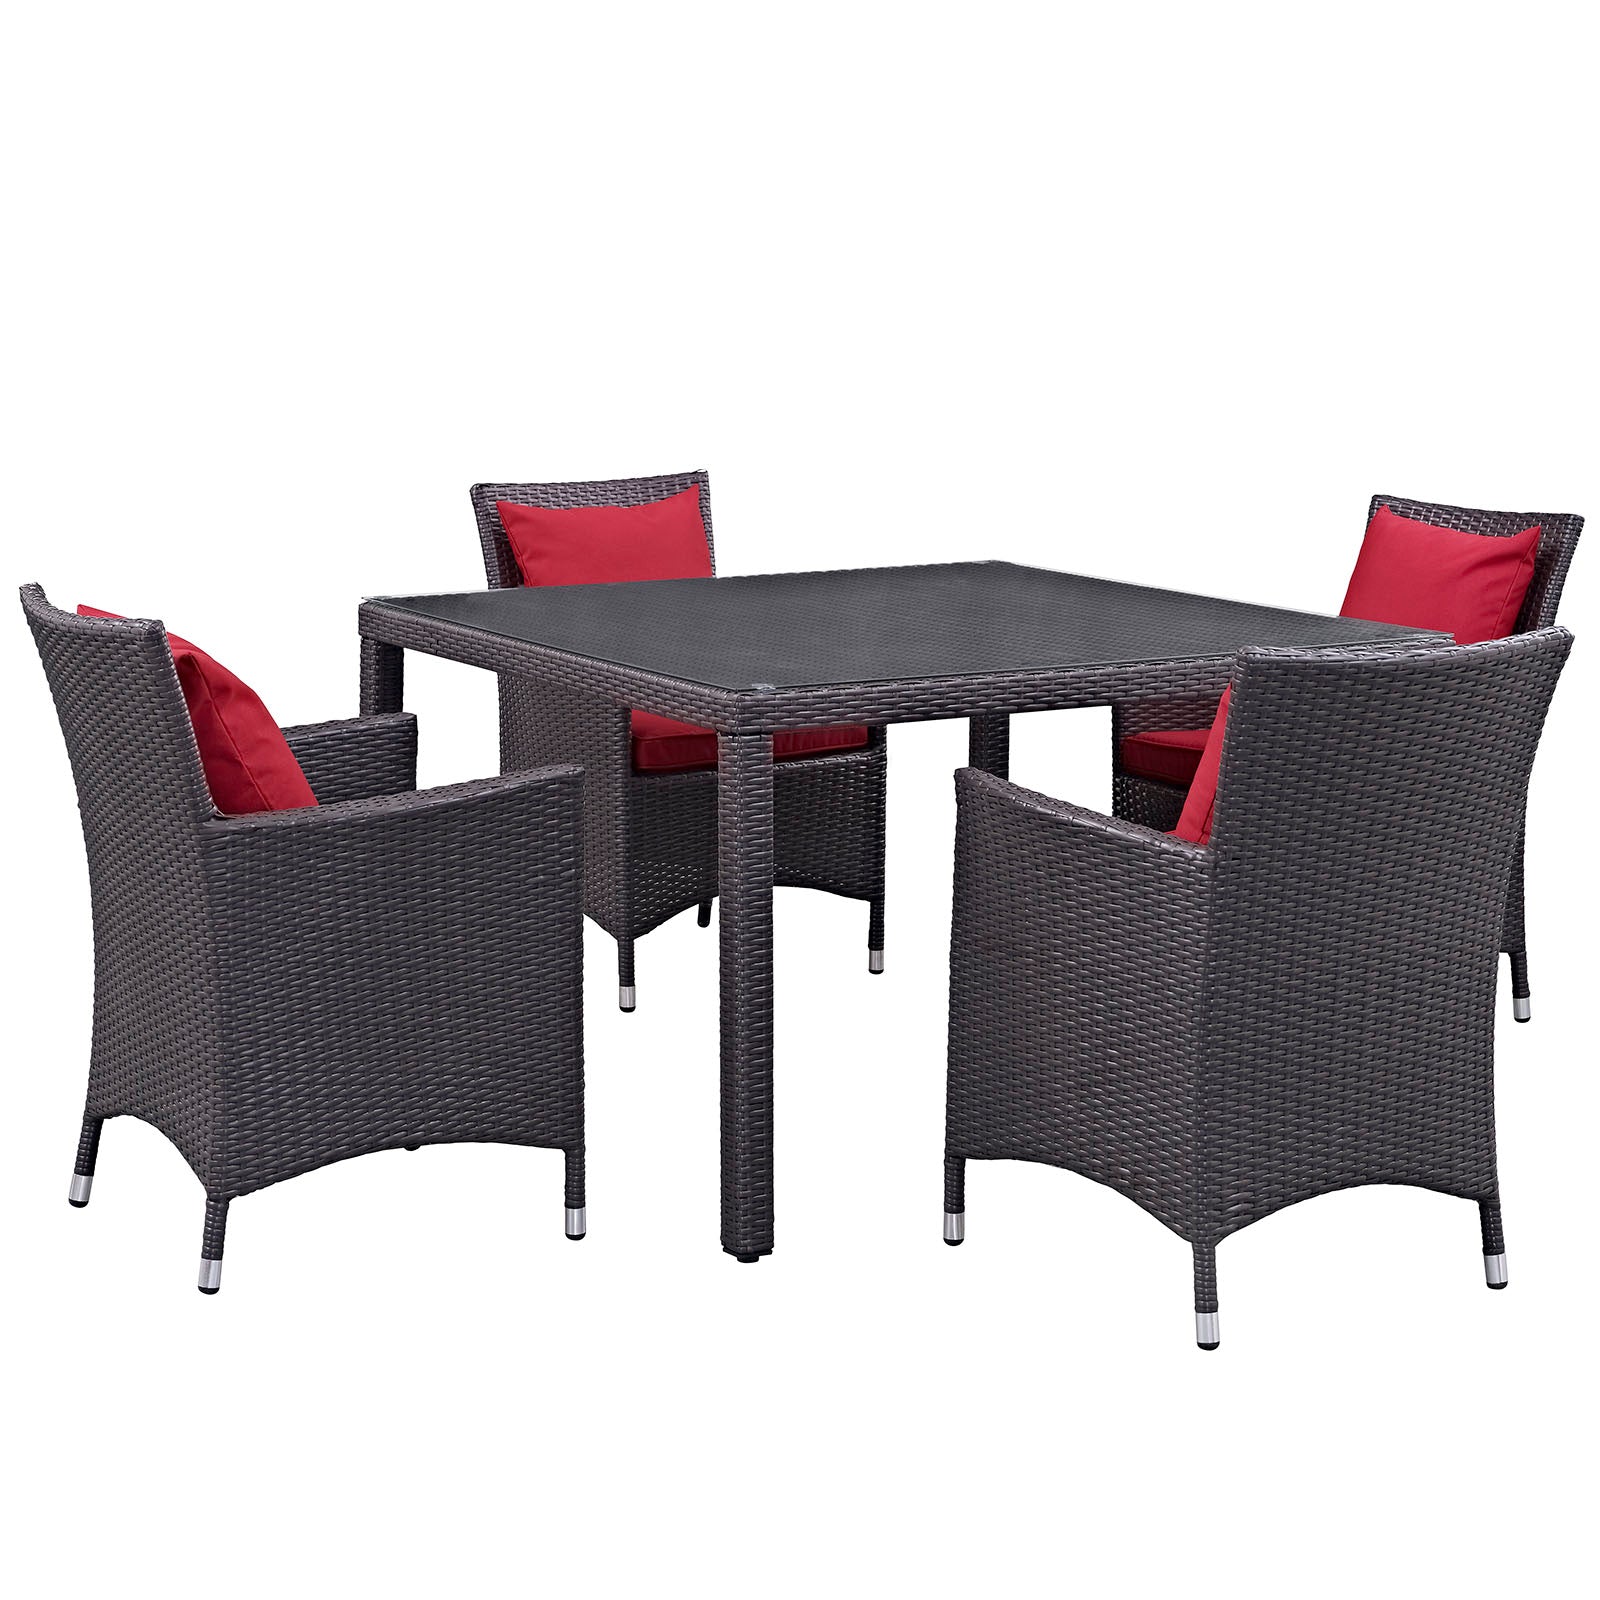 Modway Outdoor Dining Sets - Convene 5 Piece Outdoor Patio Dining Set Espresso Red